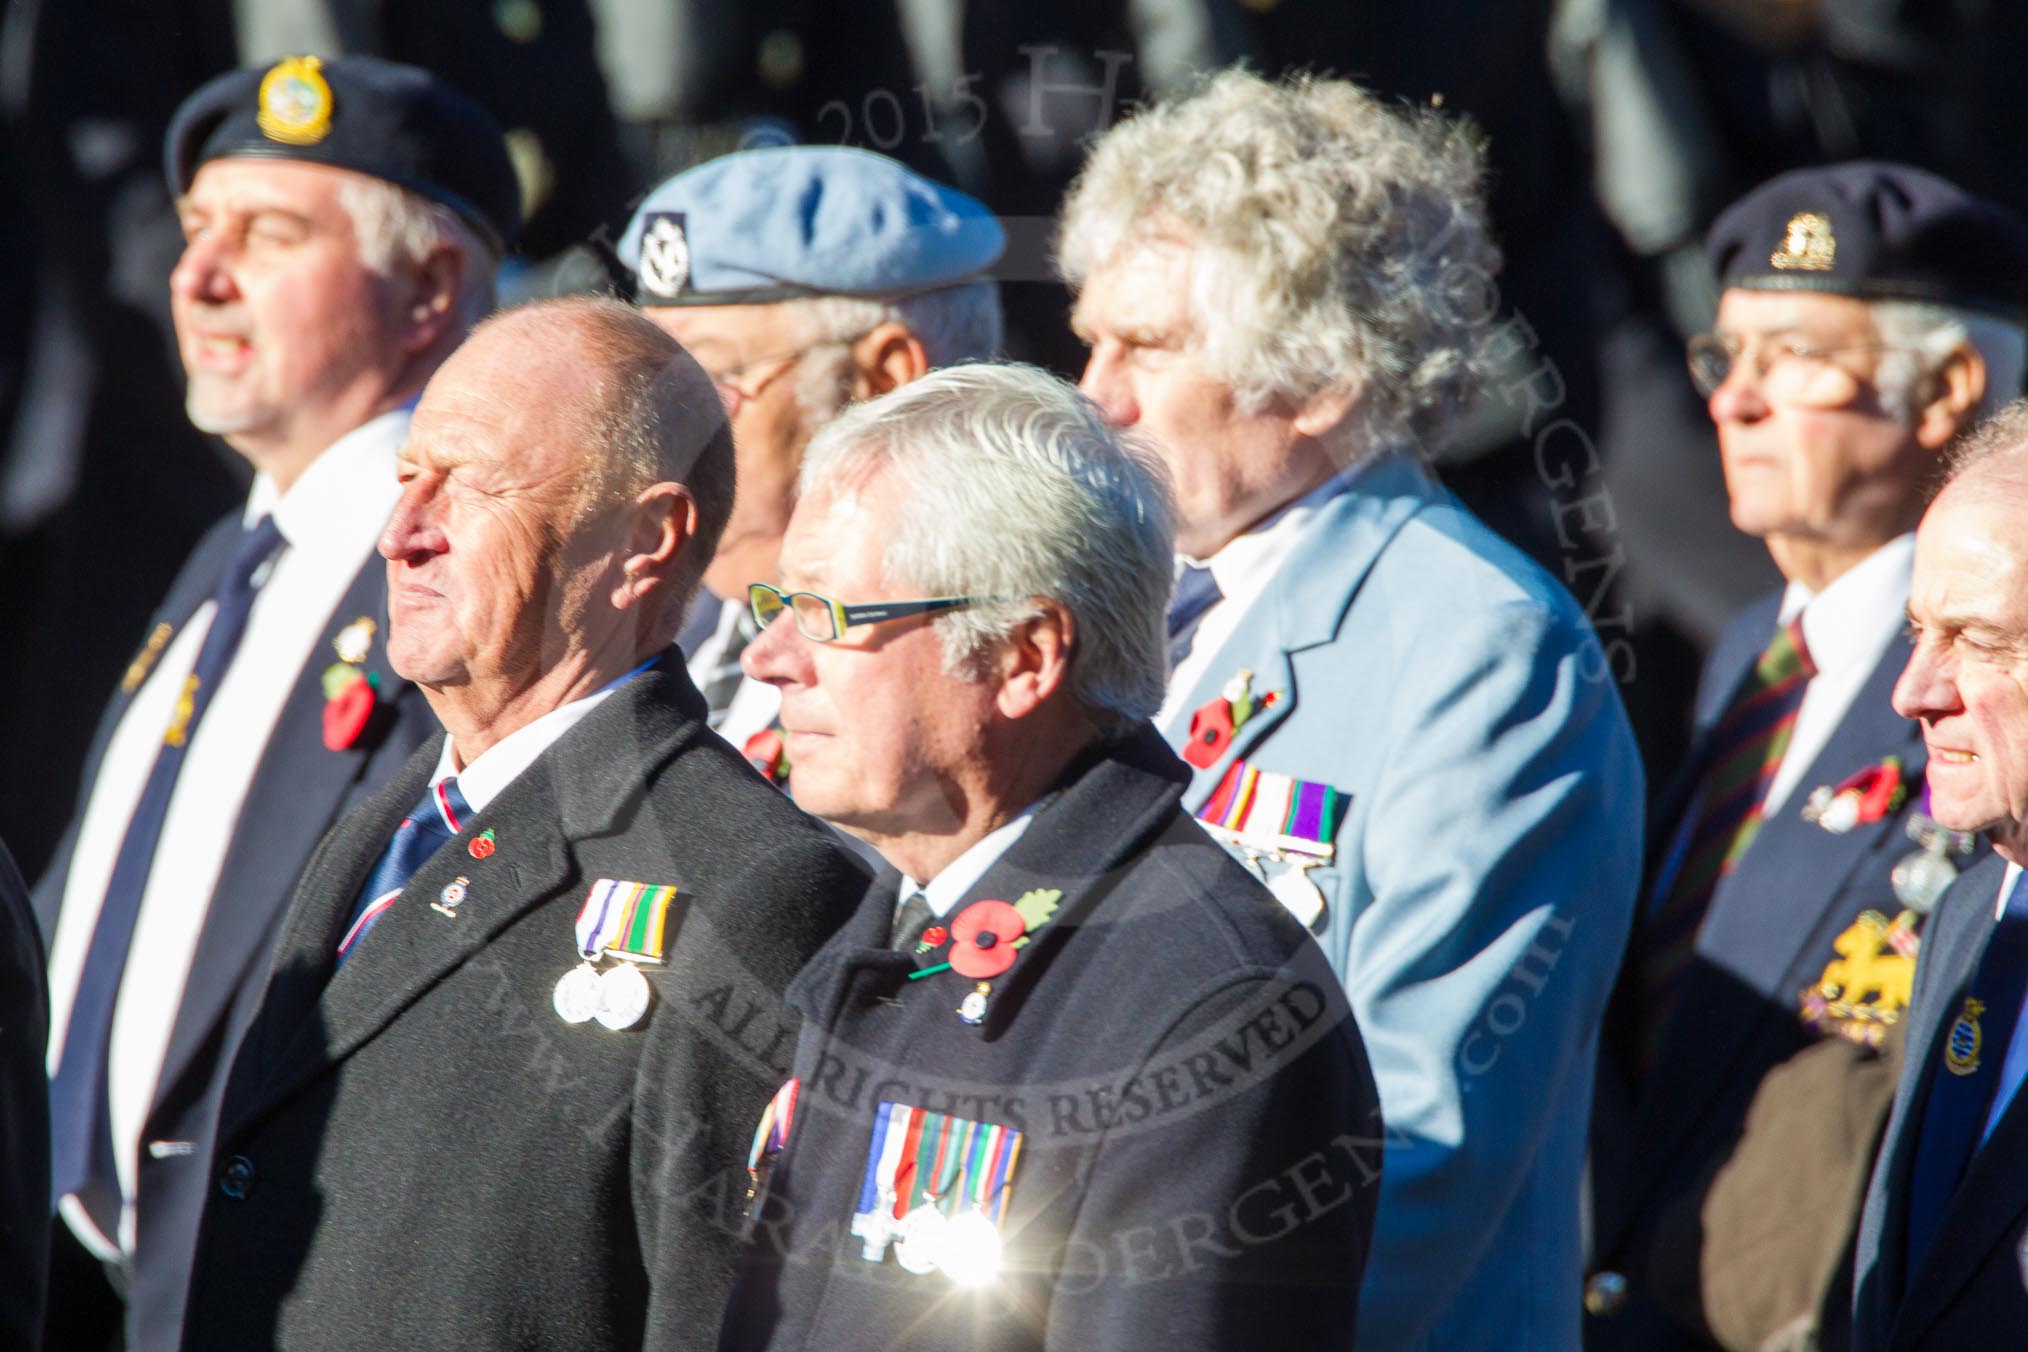 Remembrance Sunday Cenotaph March Past 2013: E18 - HMS Andromeda Association..
Press stand opposite the Foreign Office building, Whitehall, London SW1,
London,
Greater London,
United Kingdom,
on 10 November 2013 at 11:46, image #487